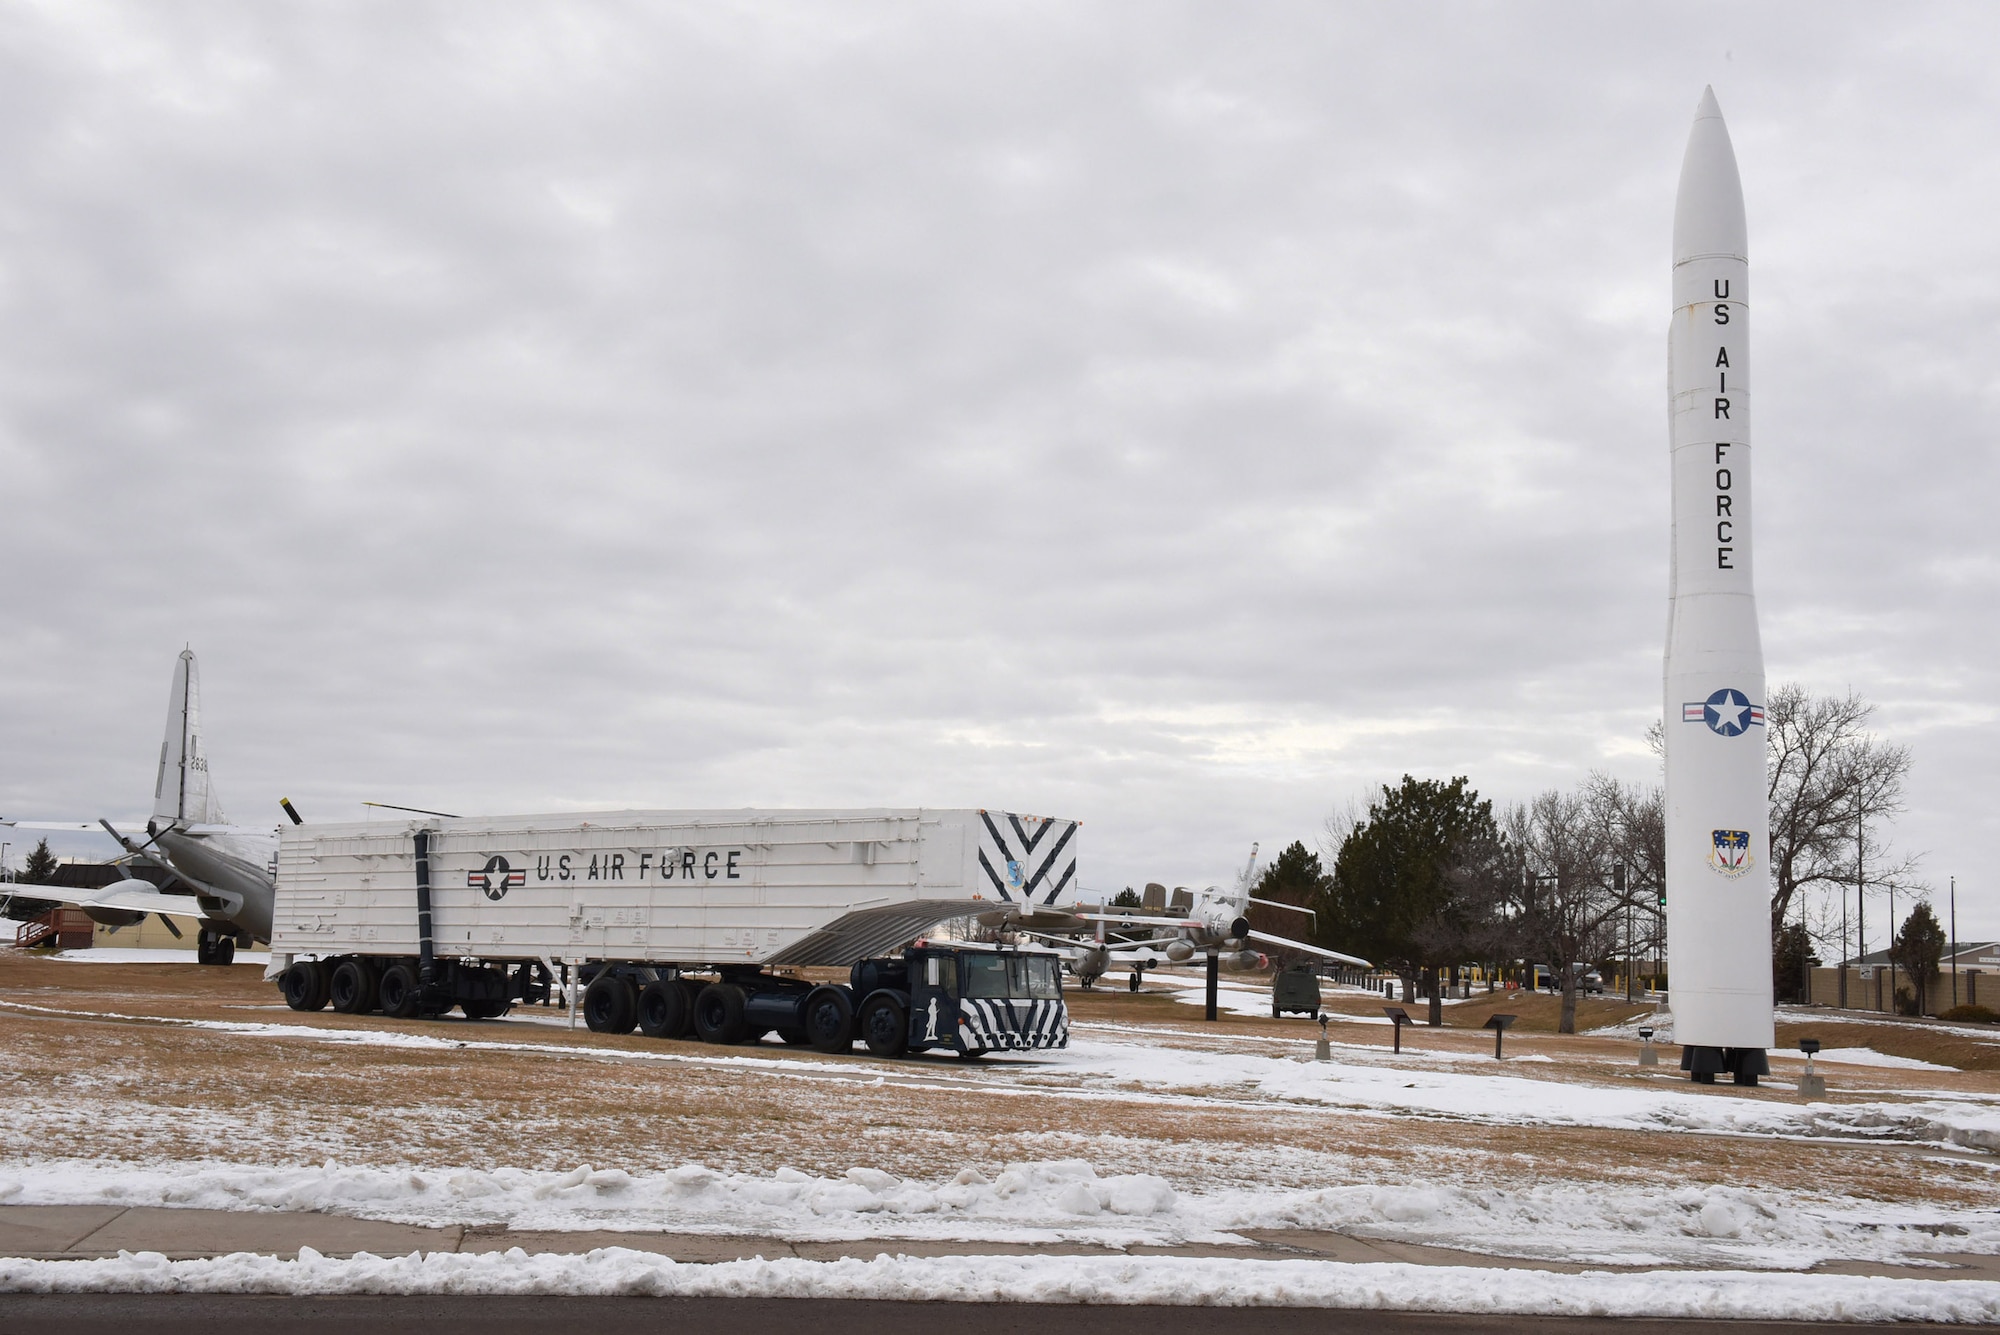 A static display of a Minuteman III intercontinental ballistic missile along with a vintage Minuteman transporter erector truck, is one of many exhibits on display at the Malmstrom Historic and Air Park at Malmstrom Air Force Base, Mont.  The museum  contains more than 400 items on display that depict the history of Malmstrom and the Minuteman missile program.  (Air Force photo/Jason Heavner)